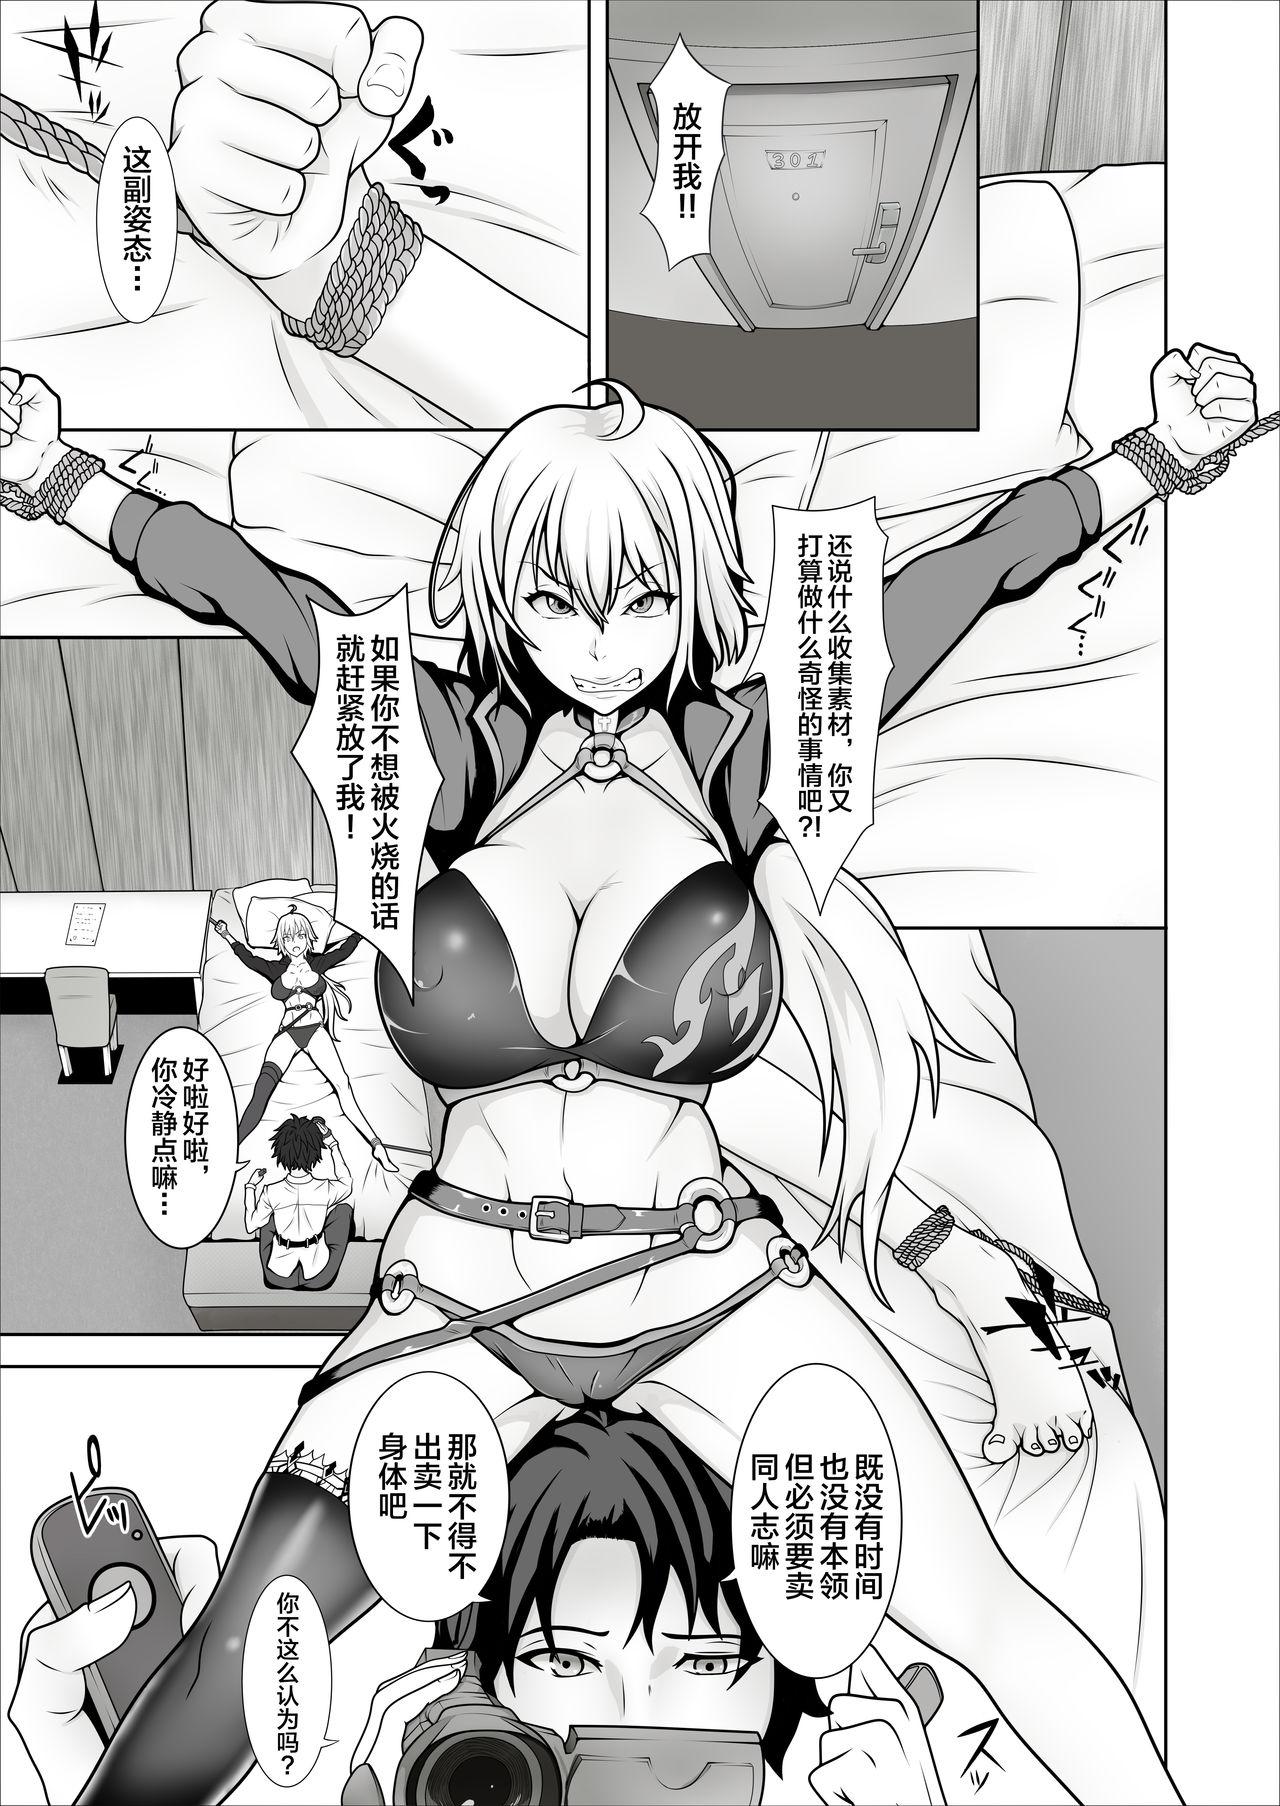 Ballbusting 俺のジャンヌは性処理係 - Fate grand order Lesbian - Page 11